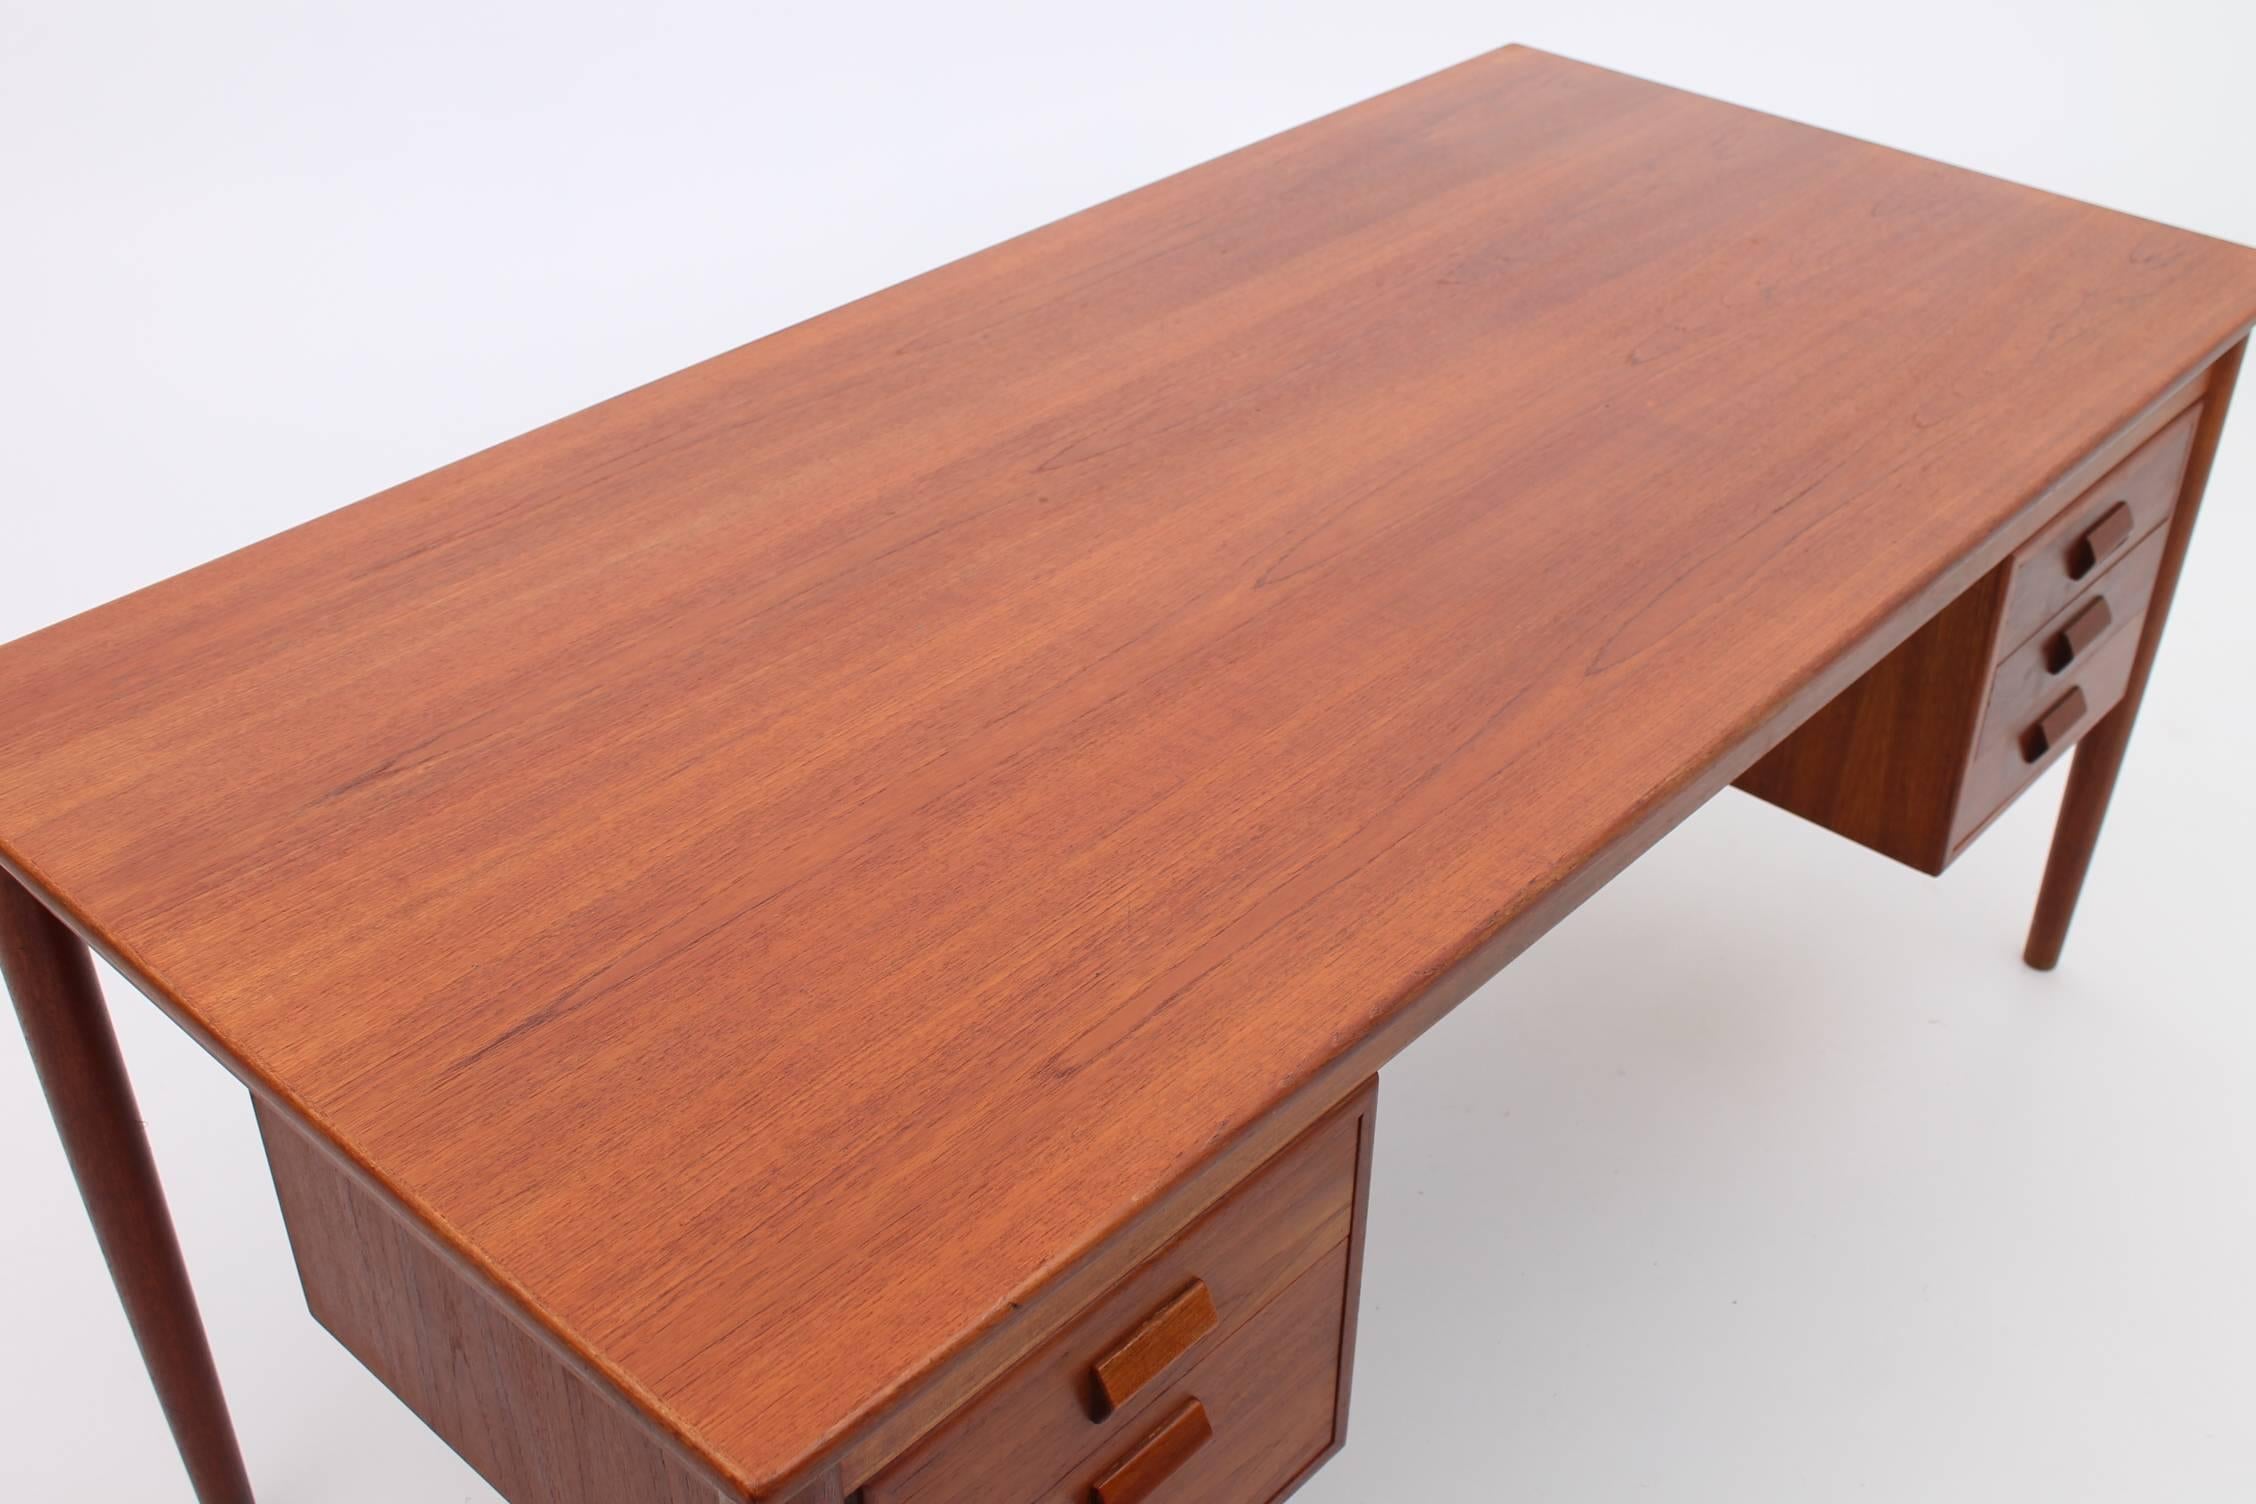 Beautiful teak desk designed by Børge Mogensen for Soborg Møbelfabrik. The desk has two floating drawers and is finished on all sides, so it looks beautiful from any angle. The desk is in excellent vintage condition with visible signs of use and